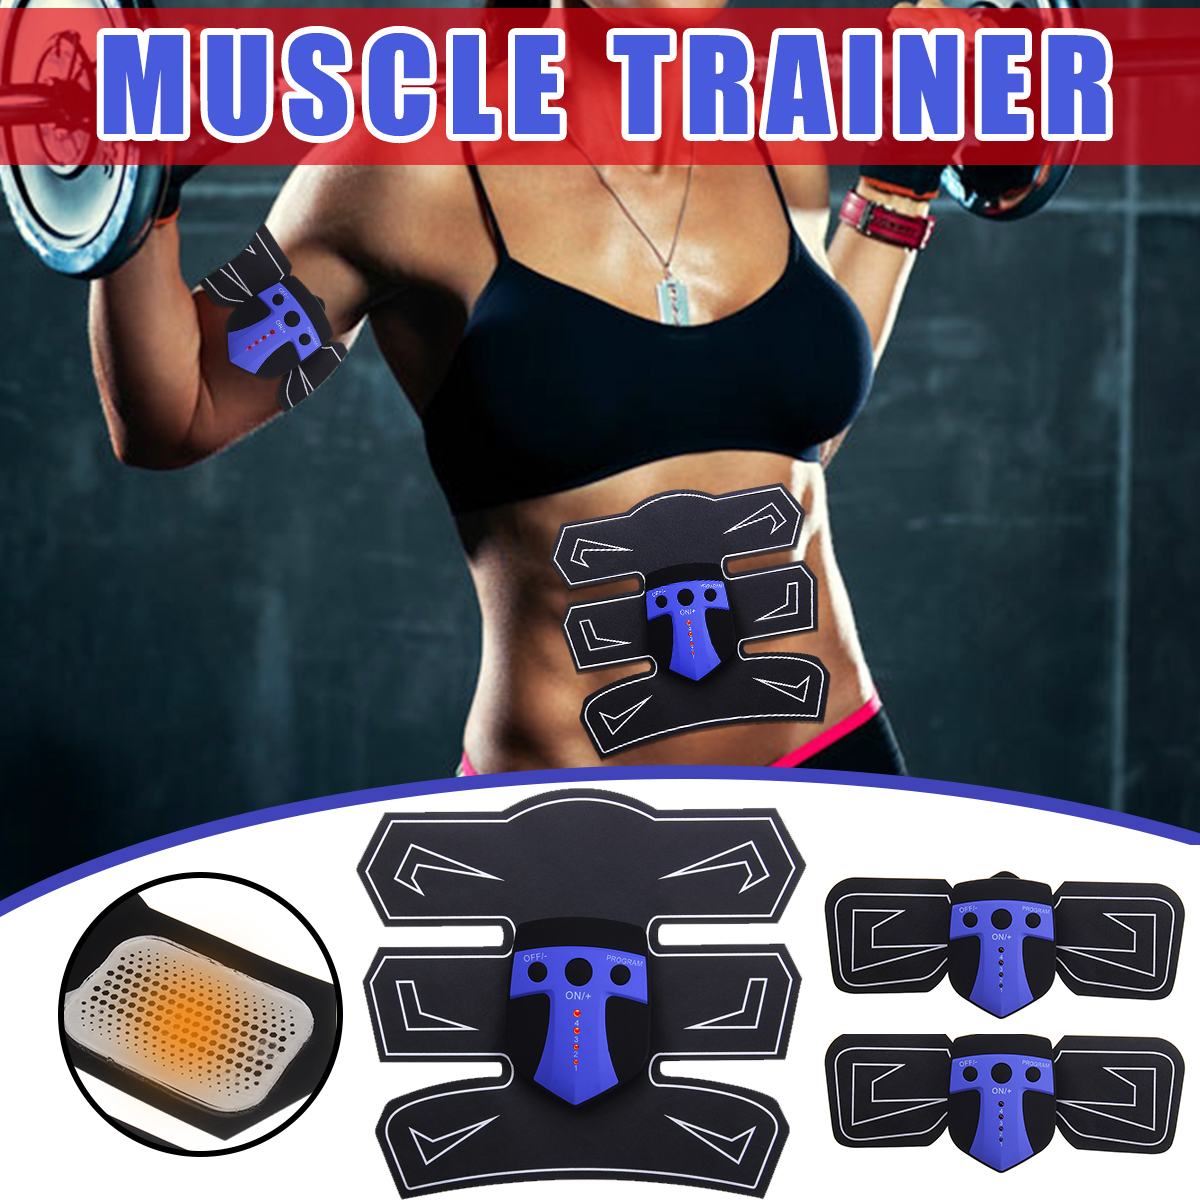 Electrical-Body-Shape-Trainer-Stimulator-Abdomen-Arm-Muscle-Training-Exercise-Tools-Fitness-1637774-1